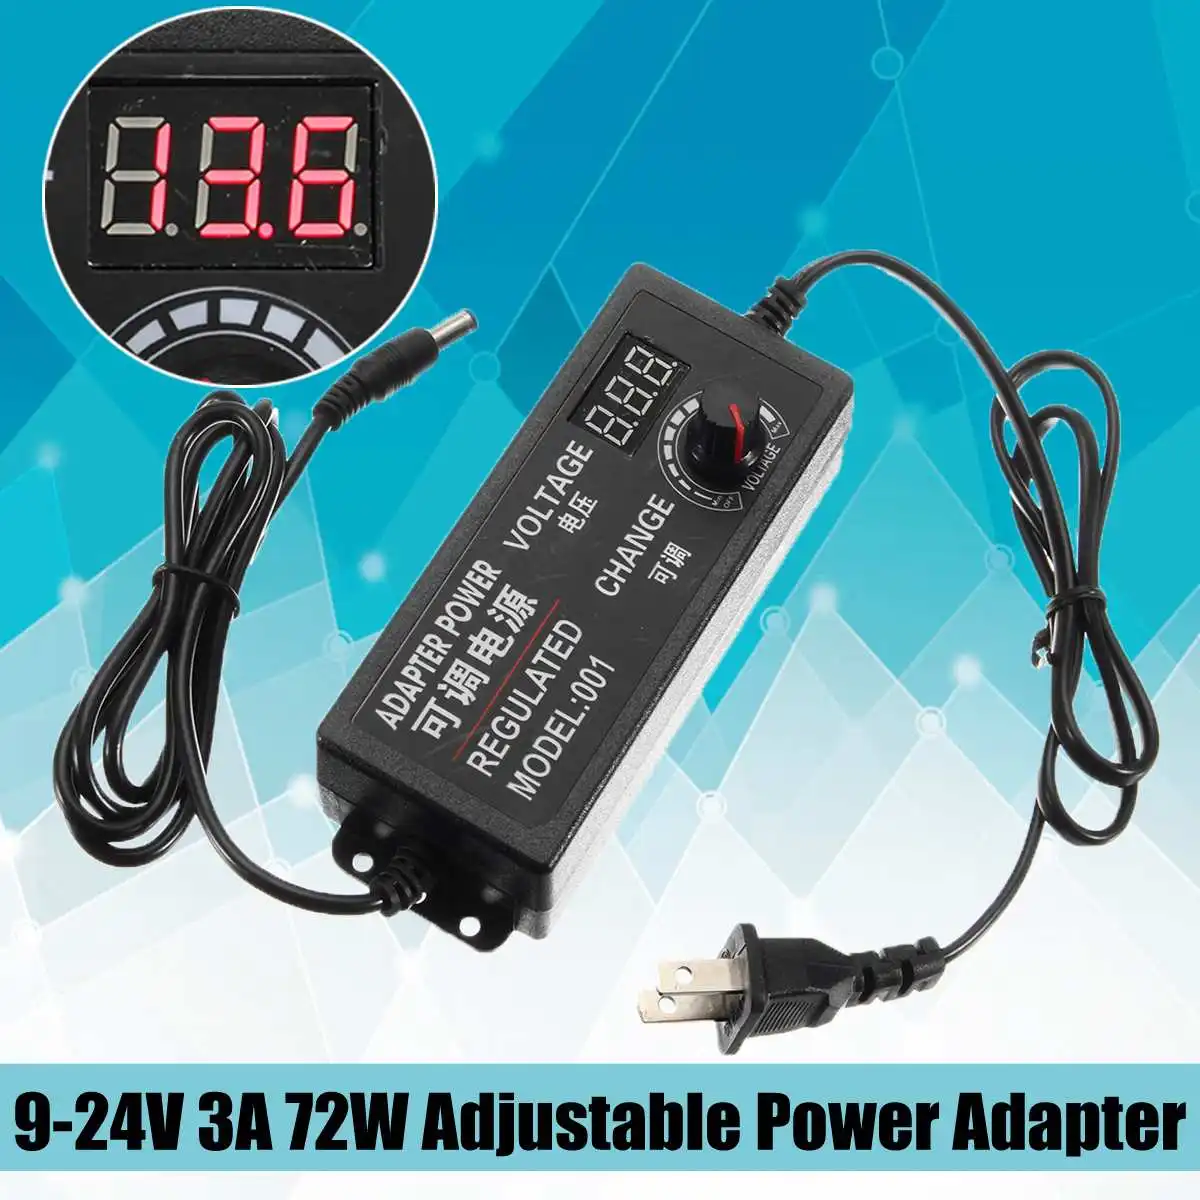 

9-24V 3A 72W AC/DC Adapter Switching Power Supply Regulated Adjustable Power Adapter For DC Motor Speed Control,Light Dimmer